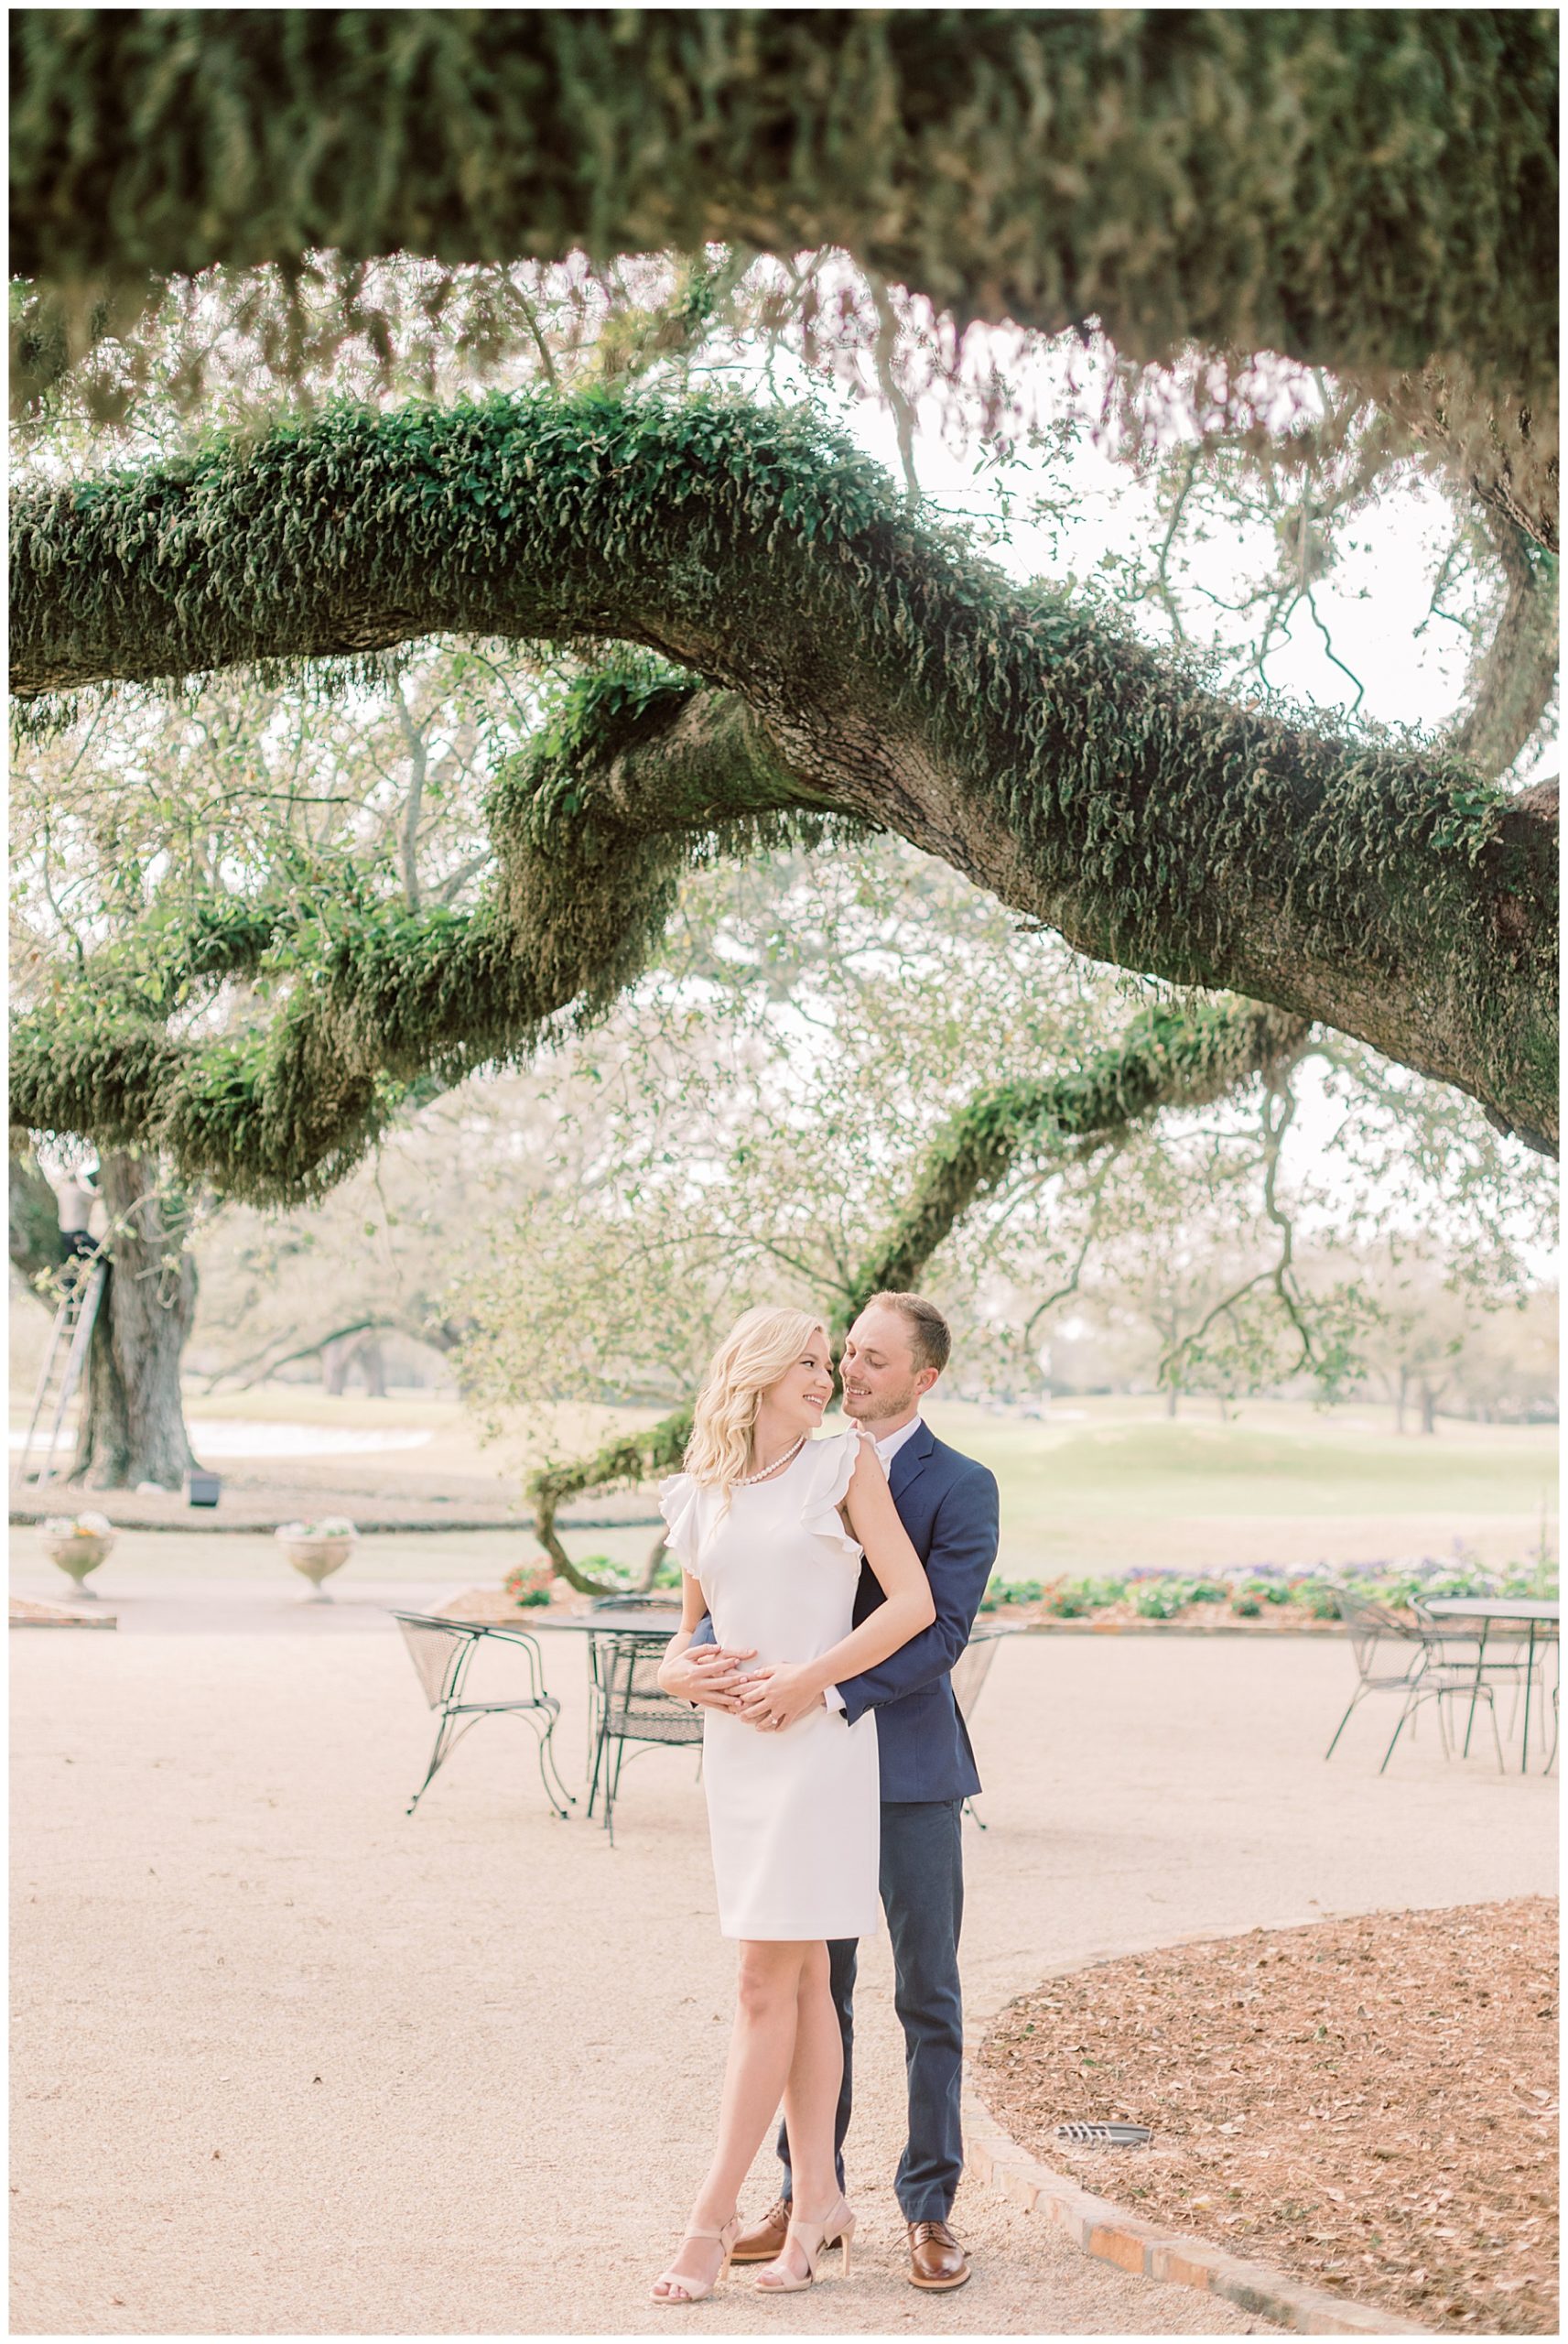 Katie and Harris snuggle under oak tree in New Orleans